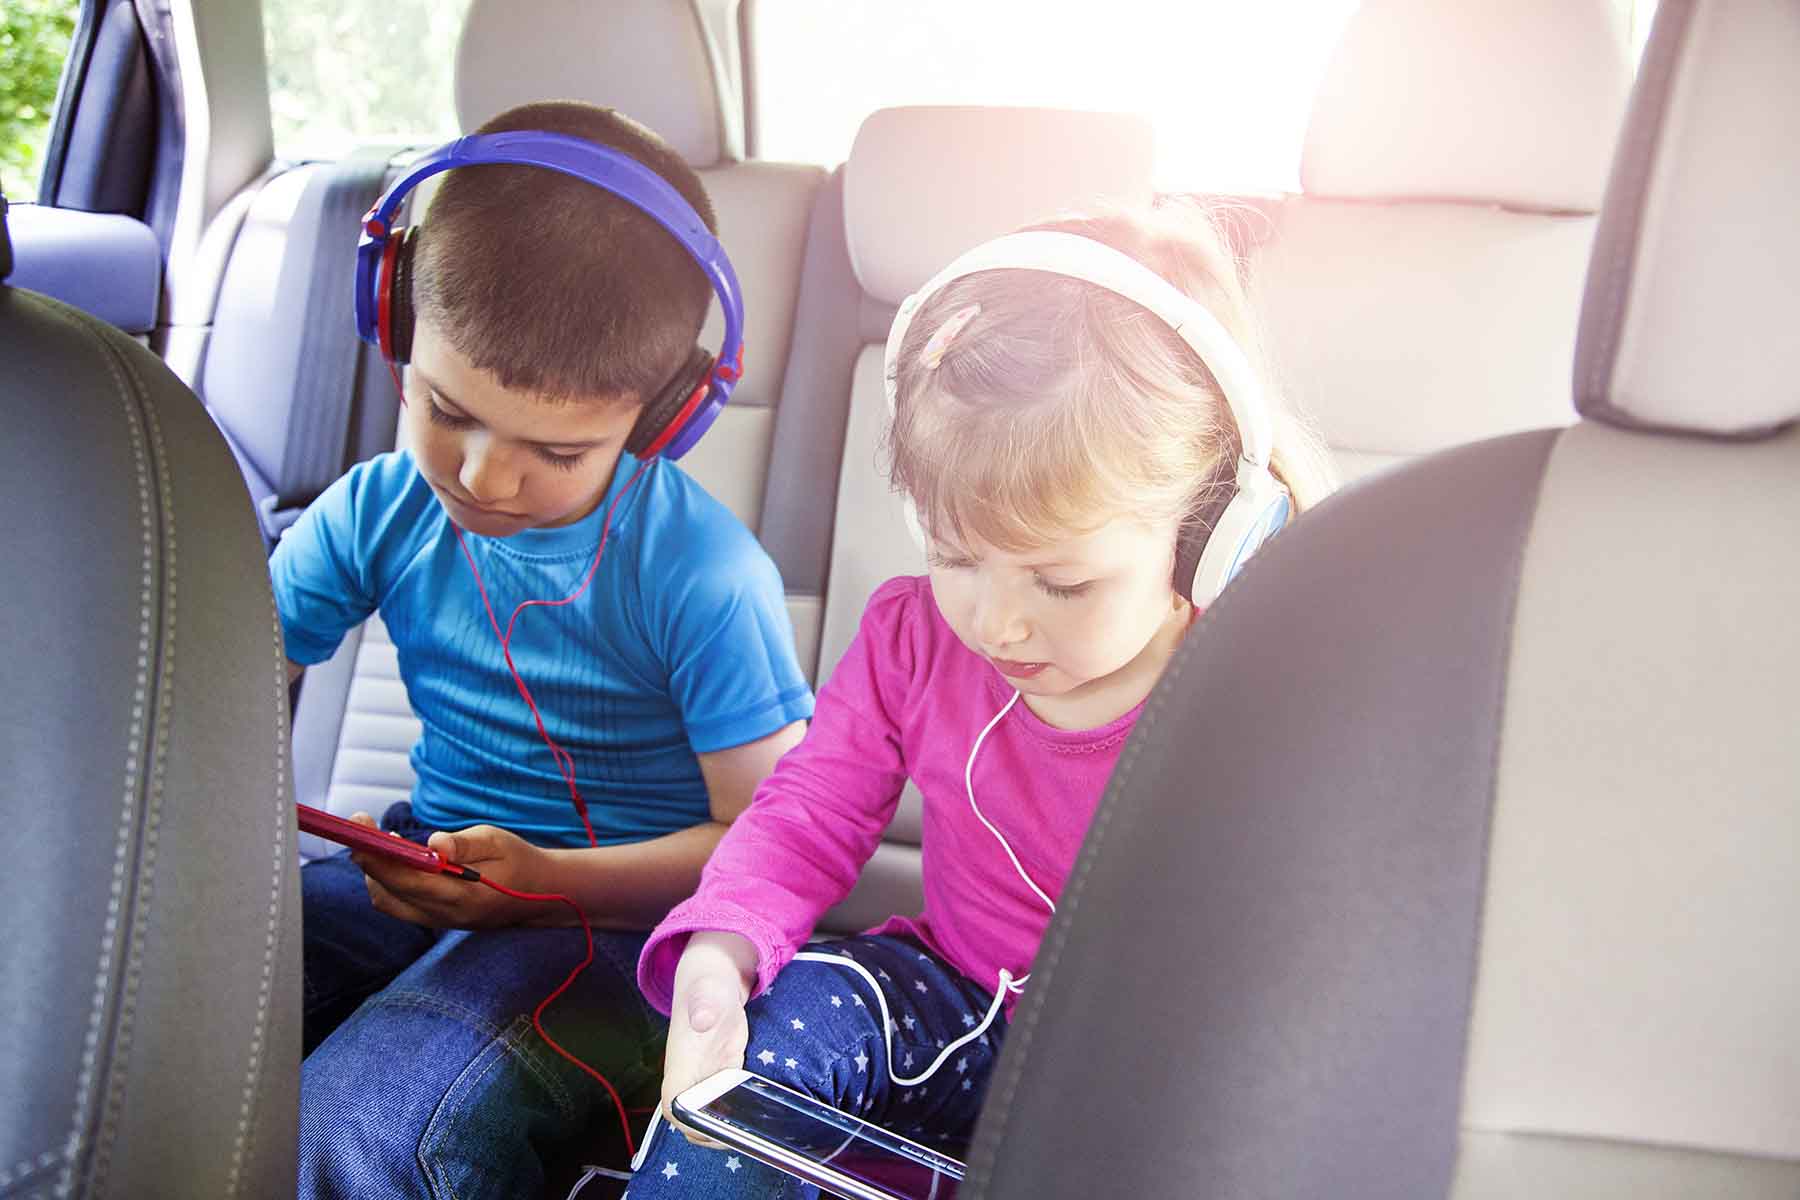 Kids playing games in the car